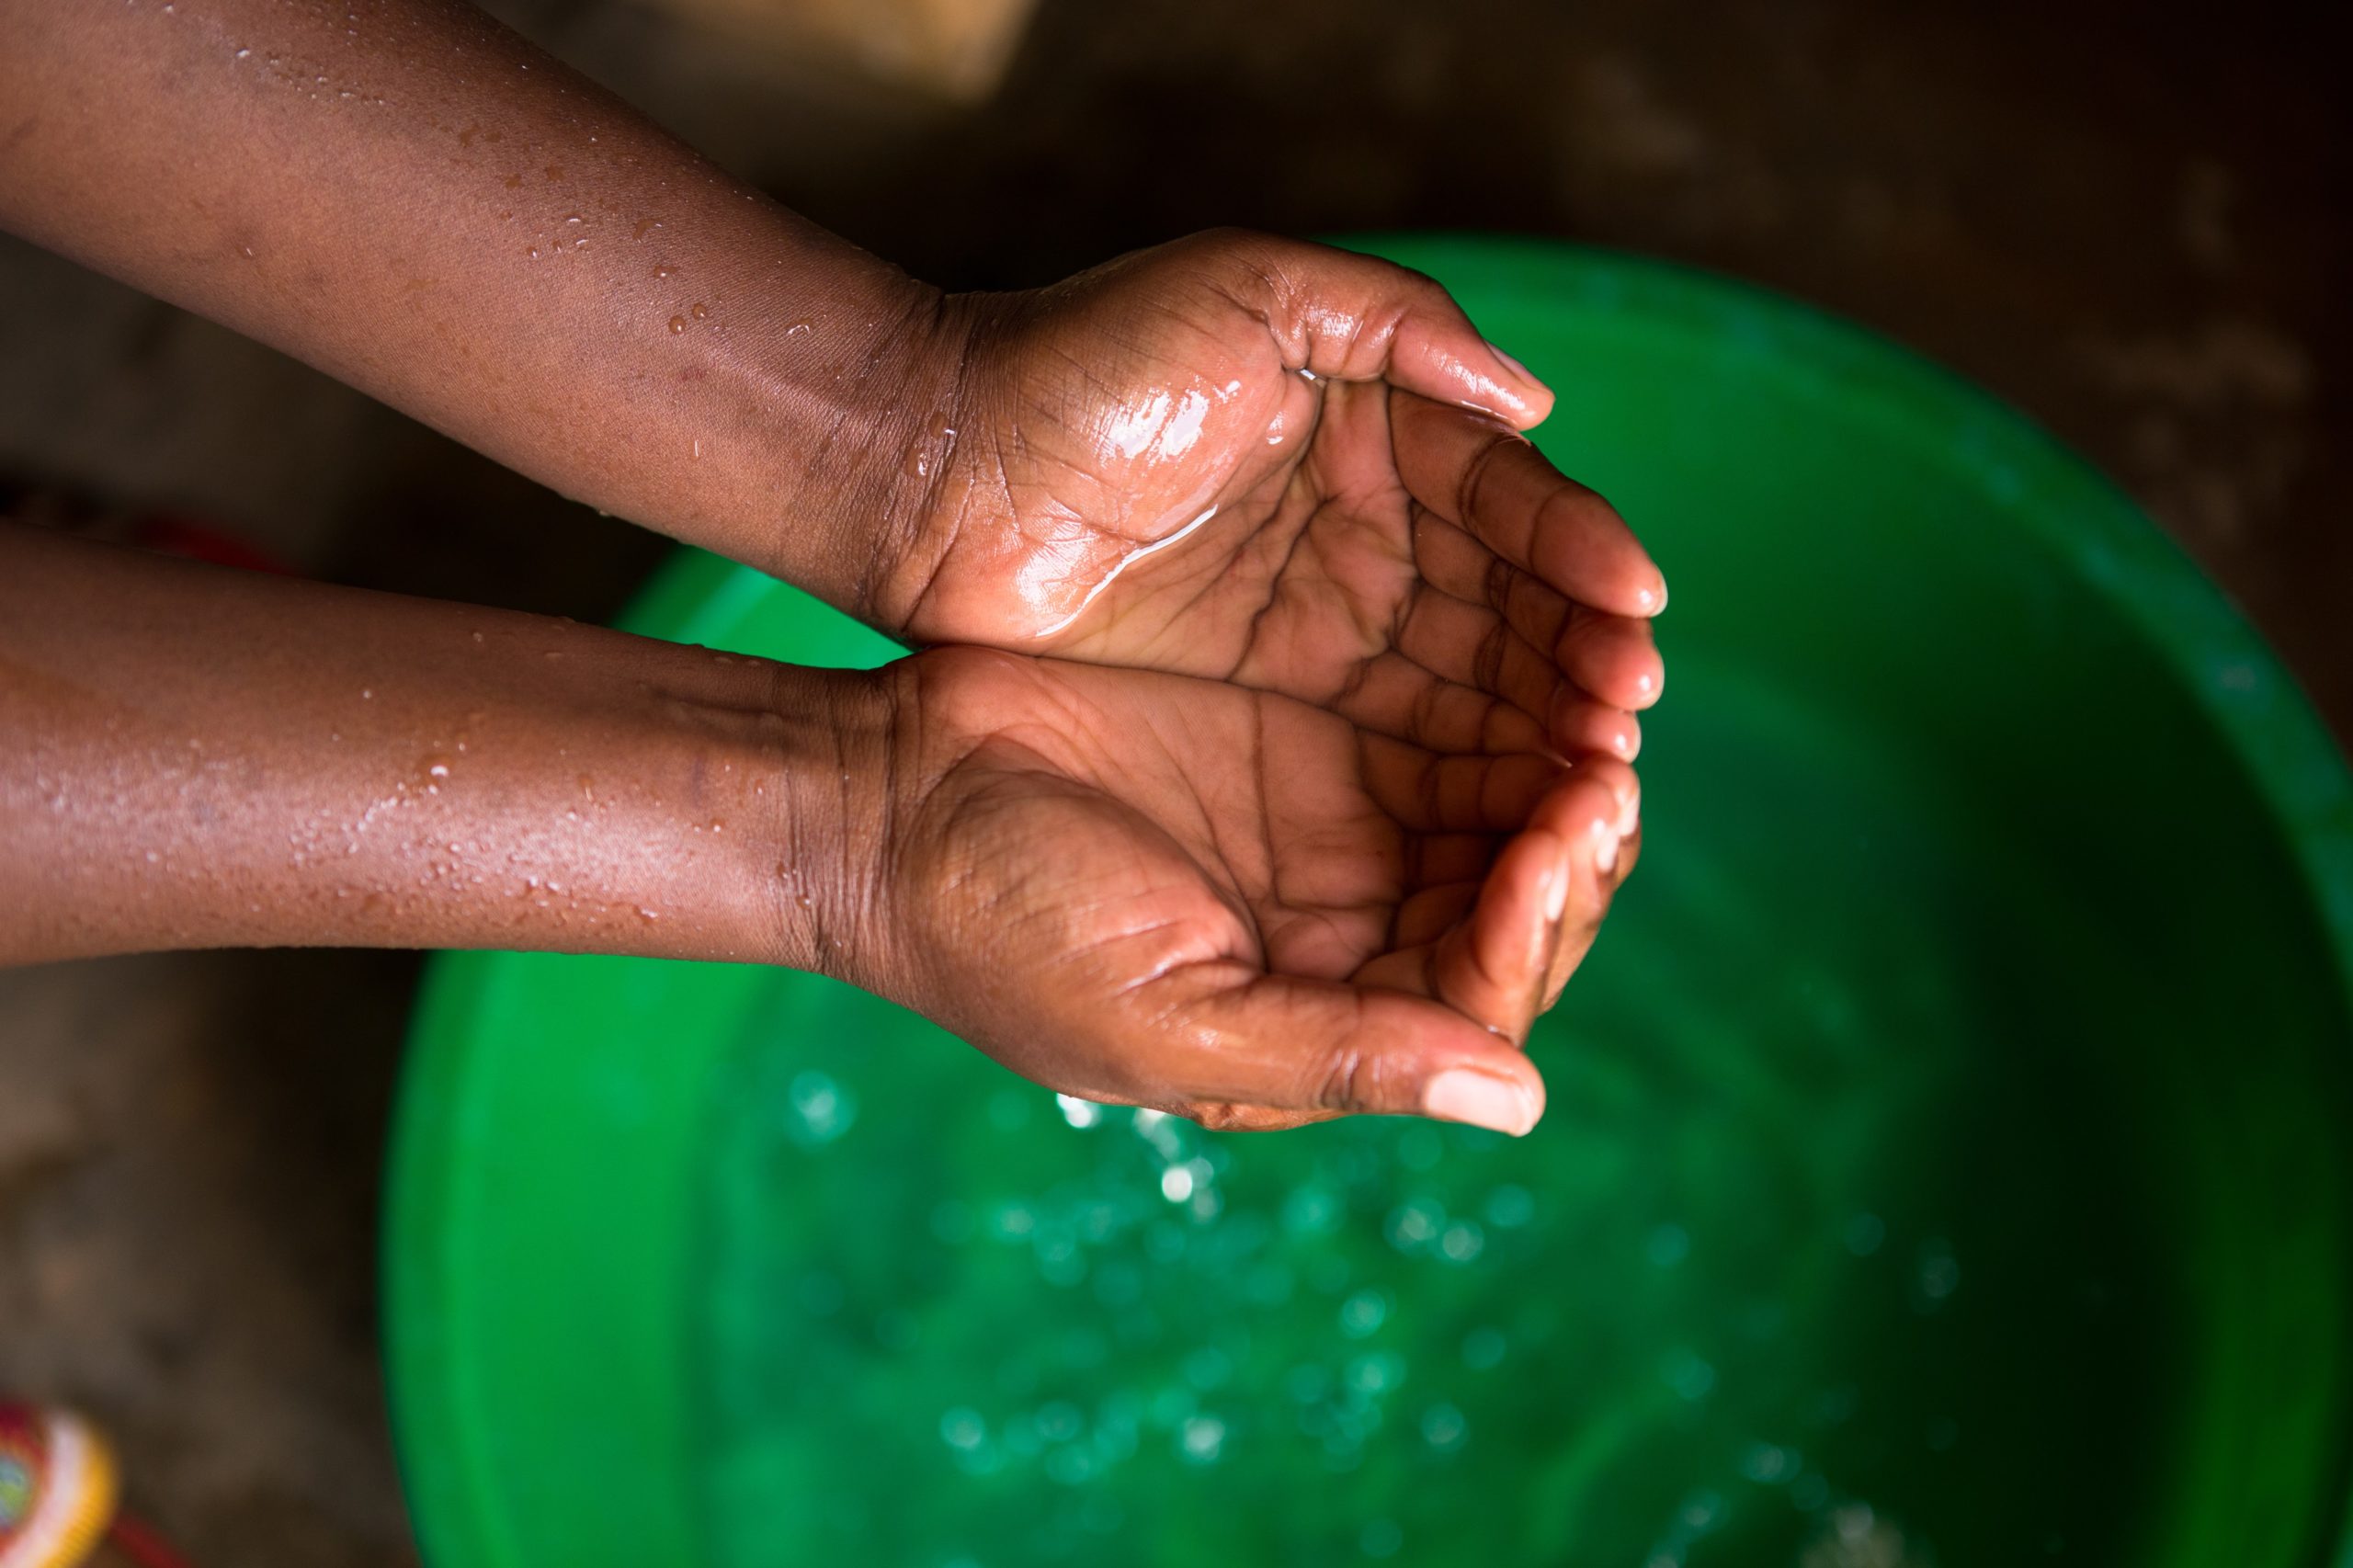 Hands filled with water over a green bowl of clean water.